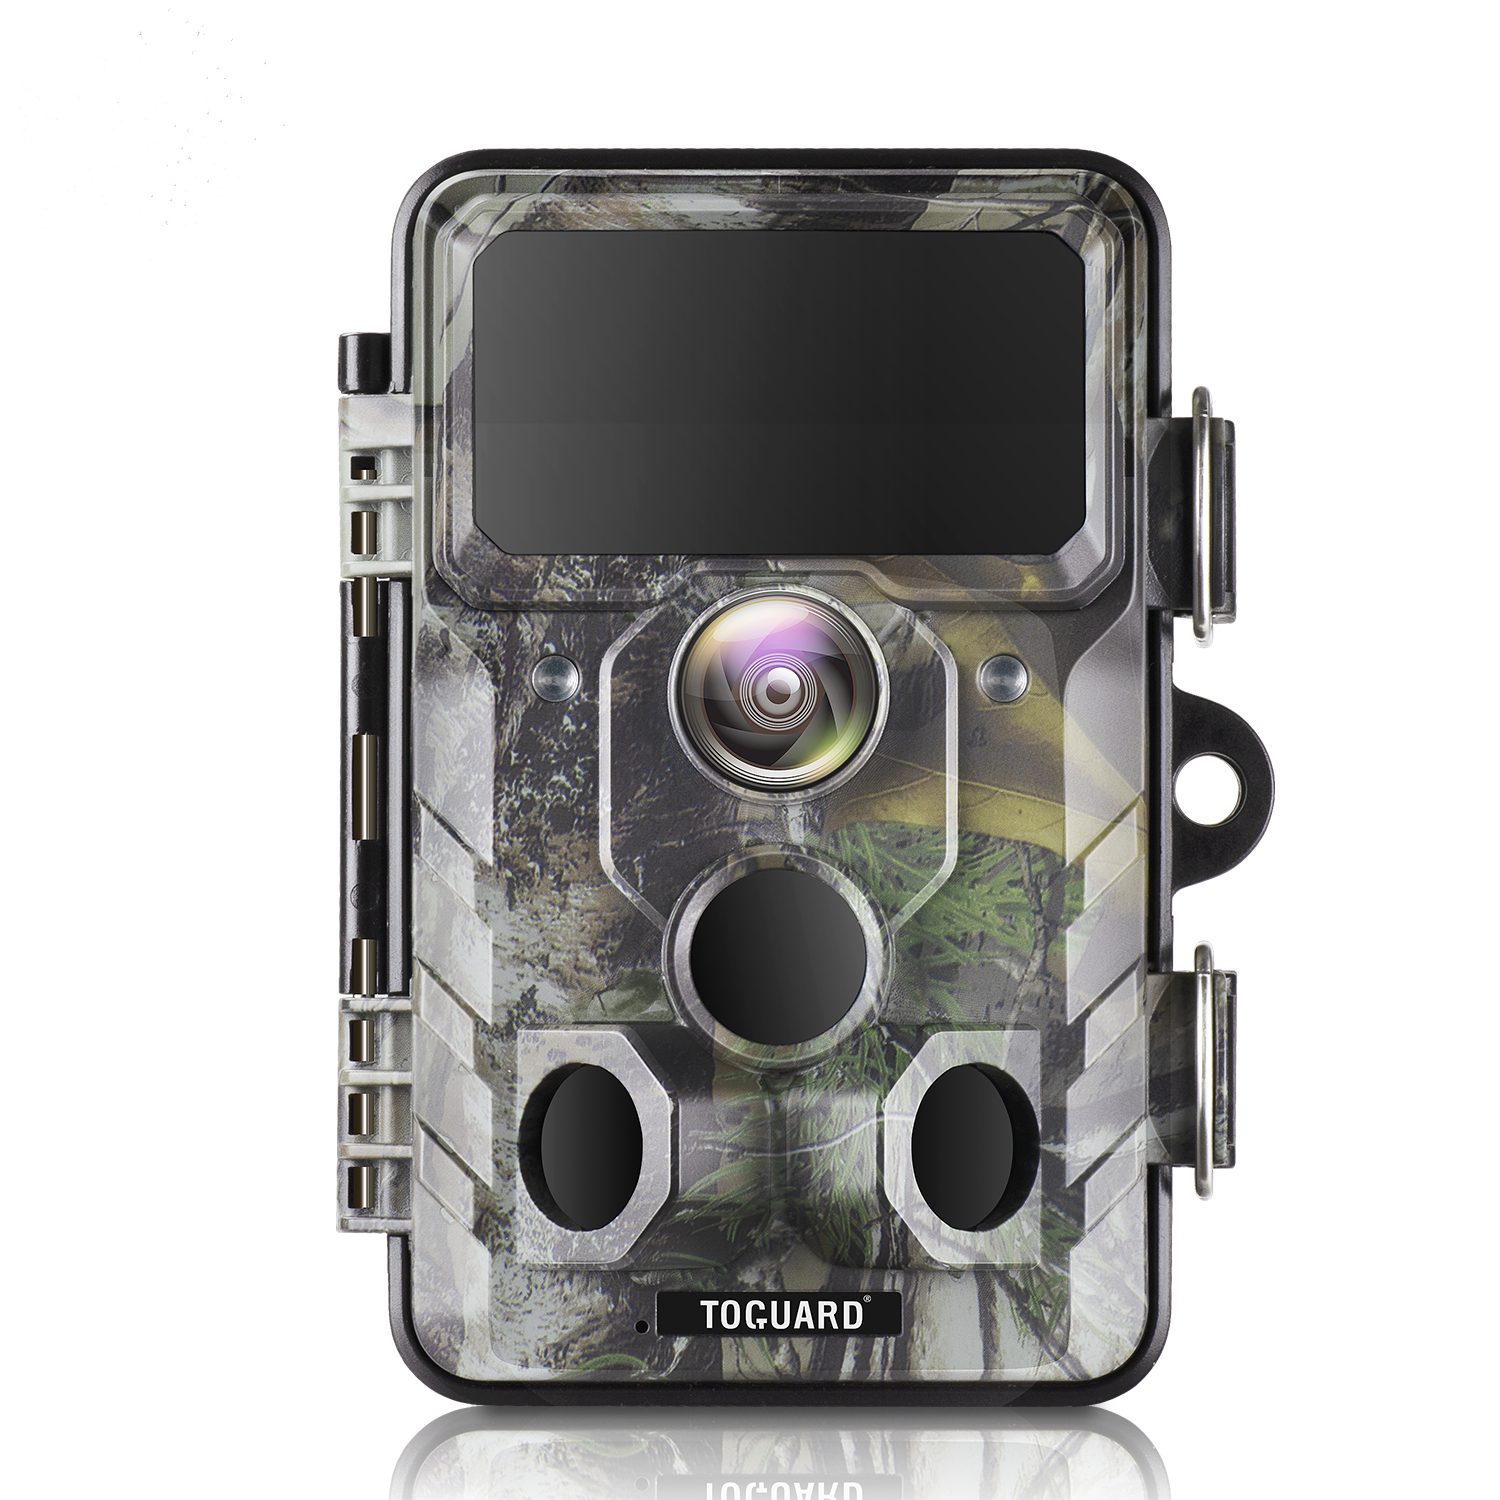 Toguard H85 Trail Camera WiFi Bluetooth 20MP 1296P Hunting Game Camera (Only Available In Europe)